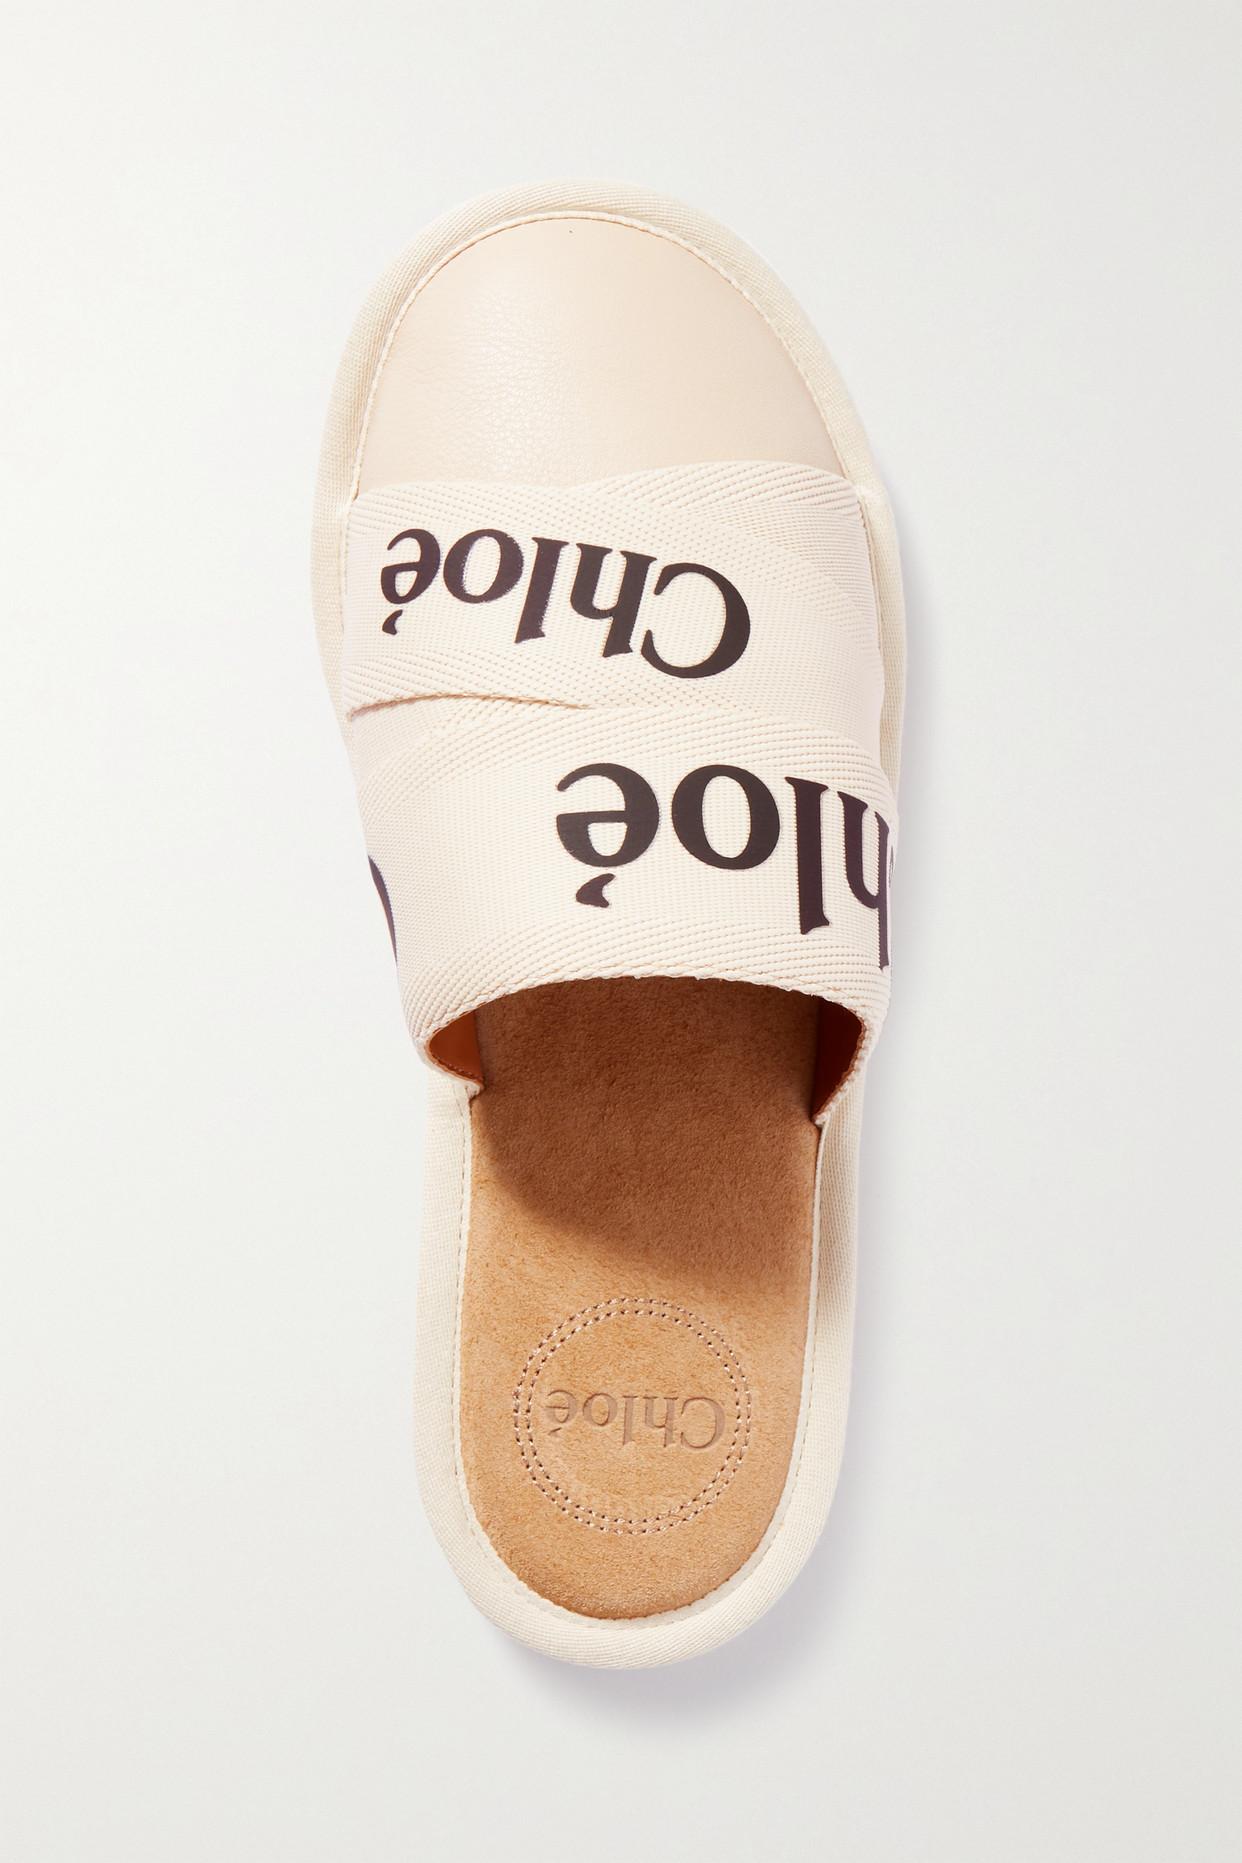 Chloé Woody Logo-print Canvas And Leather Slippers in White | Lyst